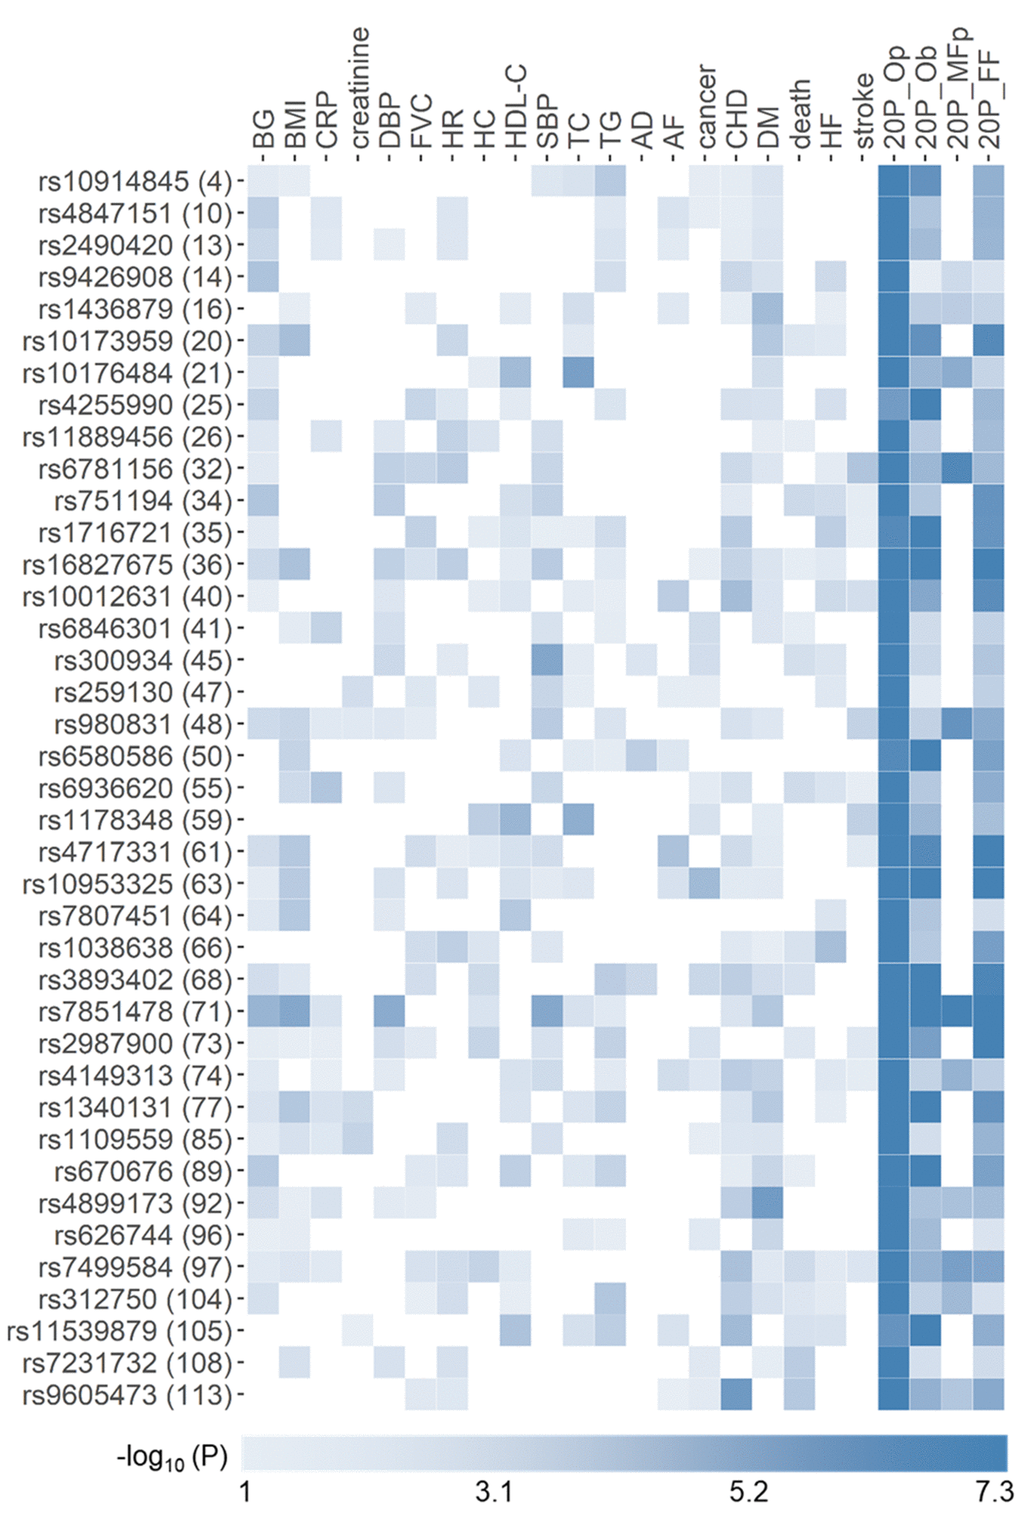 Heat map of phenotype-specific associations for selected pleiotropic SNPs. Data are for 39 novel SNPs with pleiotropic associations in the domains of all 20 phenotypes (20P) from Table 2. Numbers in parentheses are SNP IDs in Table 2. Phenotypes are defined in Table 1. FF, Op, and Ob denote pleiotropic meta-tests either from pathway 1 or 2 based on Fisher test, omnibus test with correlation matrix for phenotypes, and omnibus test with correlation matrix for effect statistics (Fig. 1), respectively. MFp denotes pleiotropic meta-tests from pathway 1 (Fig. 1). Colors code -log10(p-value) trimmed at GW level -log10(5×10-8)=7.3 for better resolution.